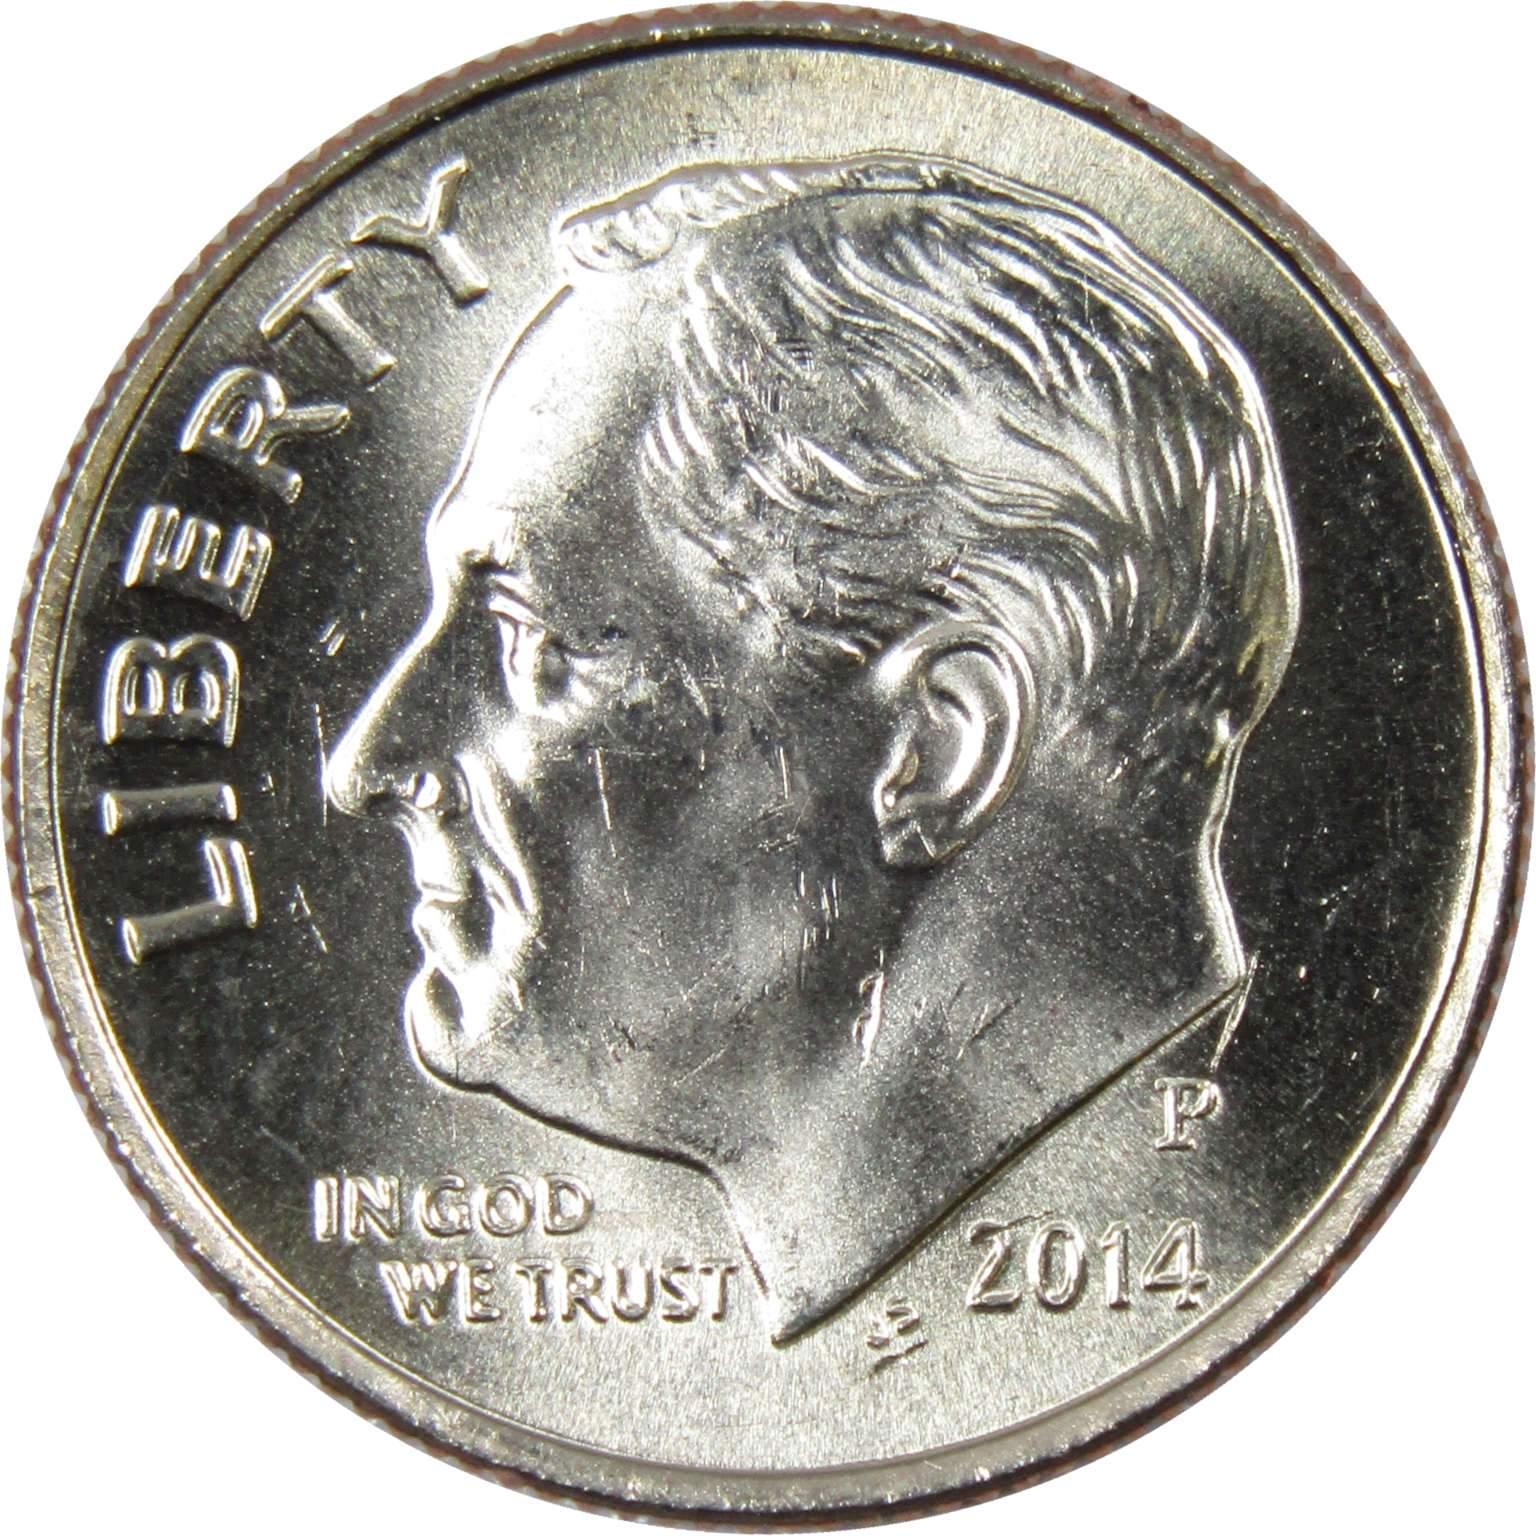 2014 P Roosevelt Dime BU Uncirculated Mint State 10c US Coin Collectible